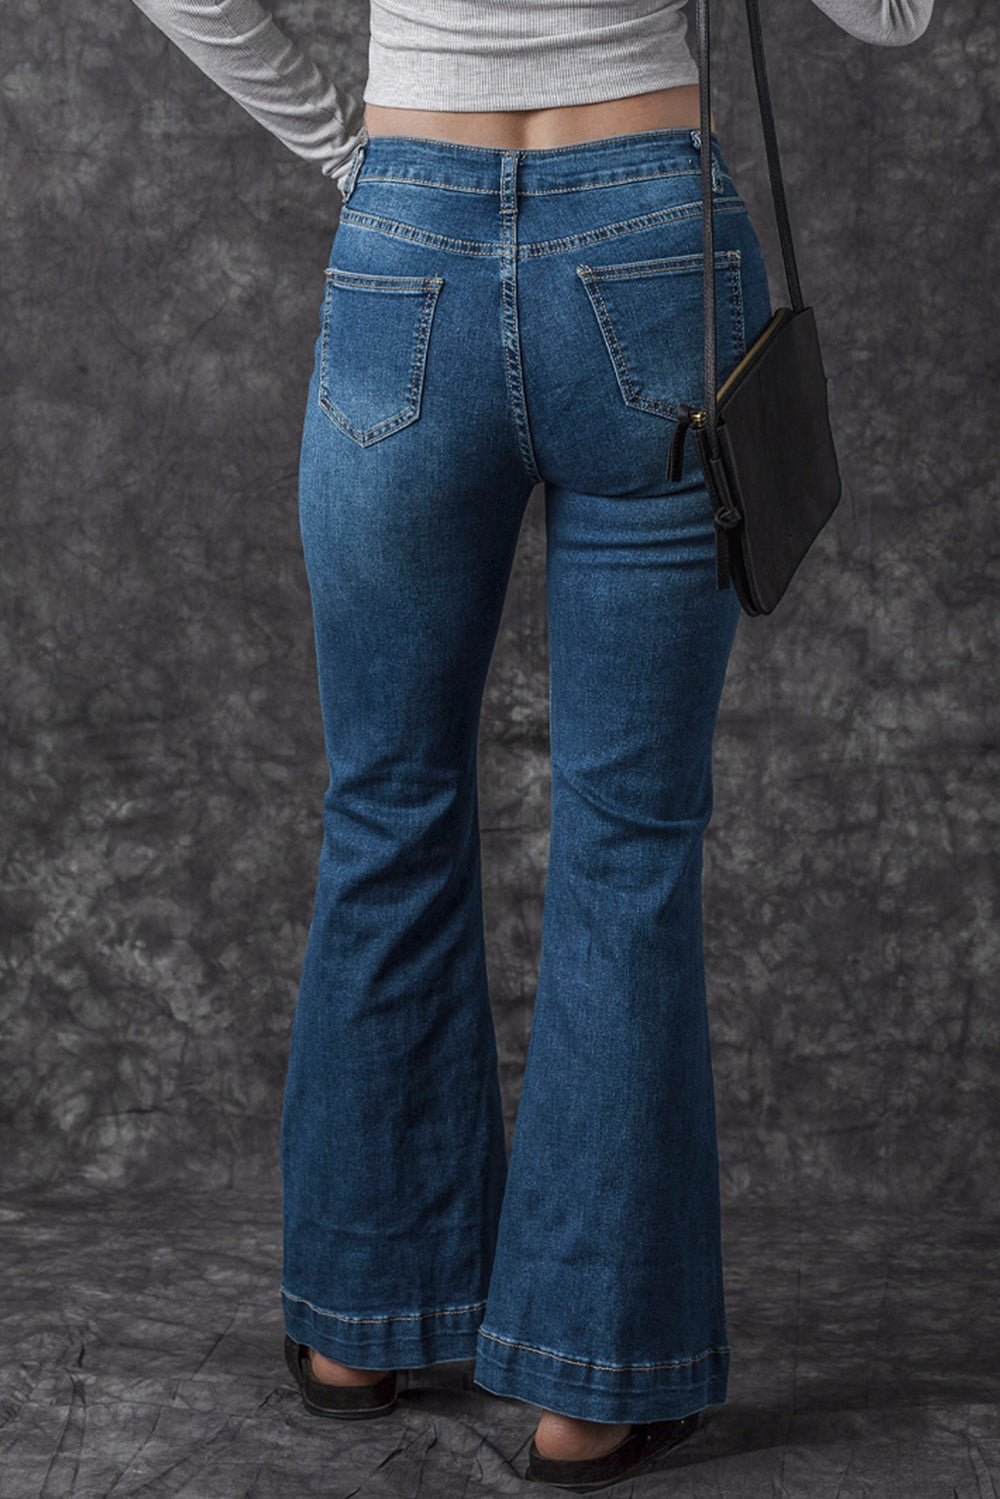 TRAVELING GYPSY-High Waist Flare Jeans - The802Gypsy 